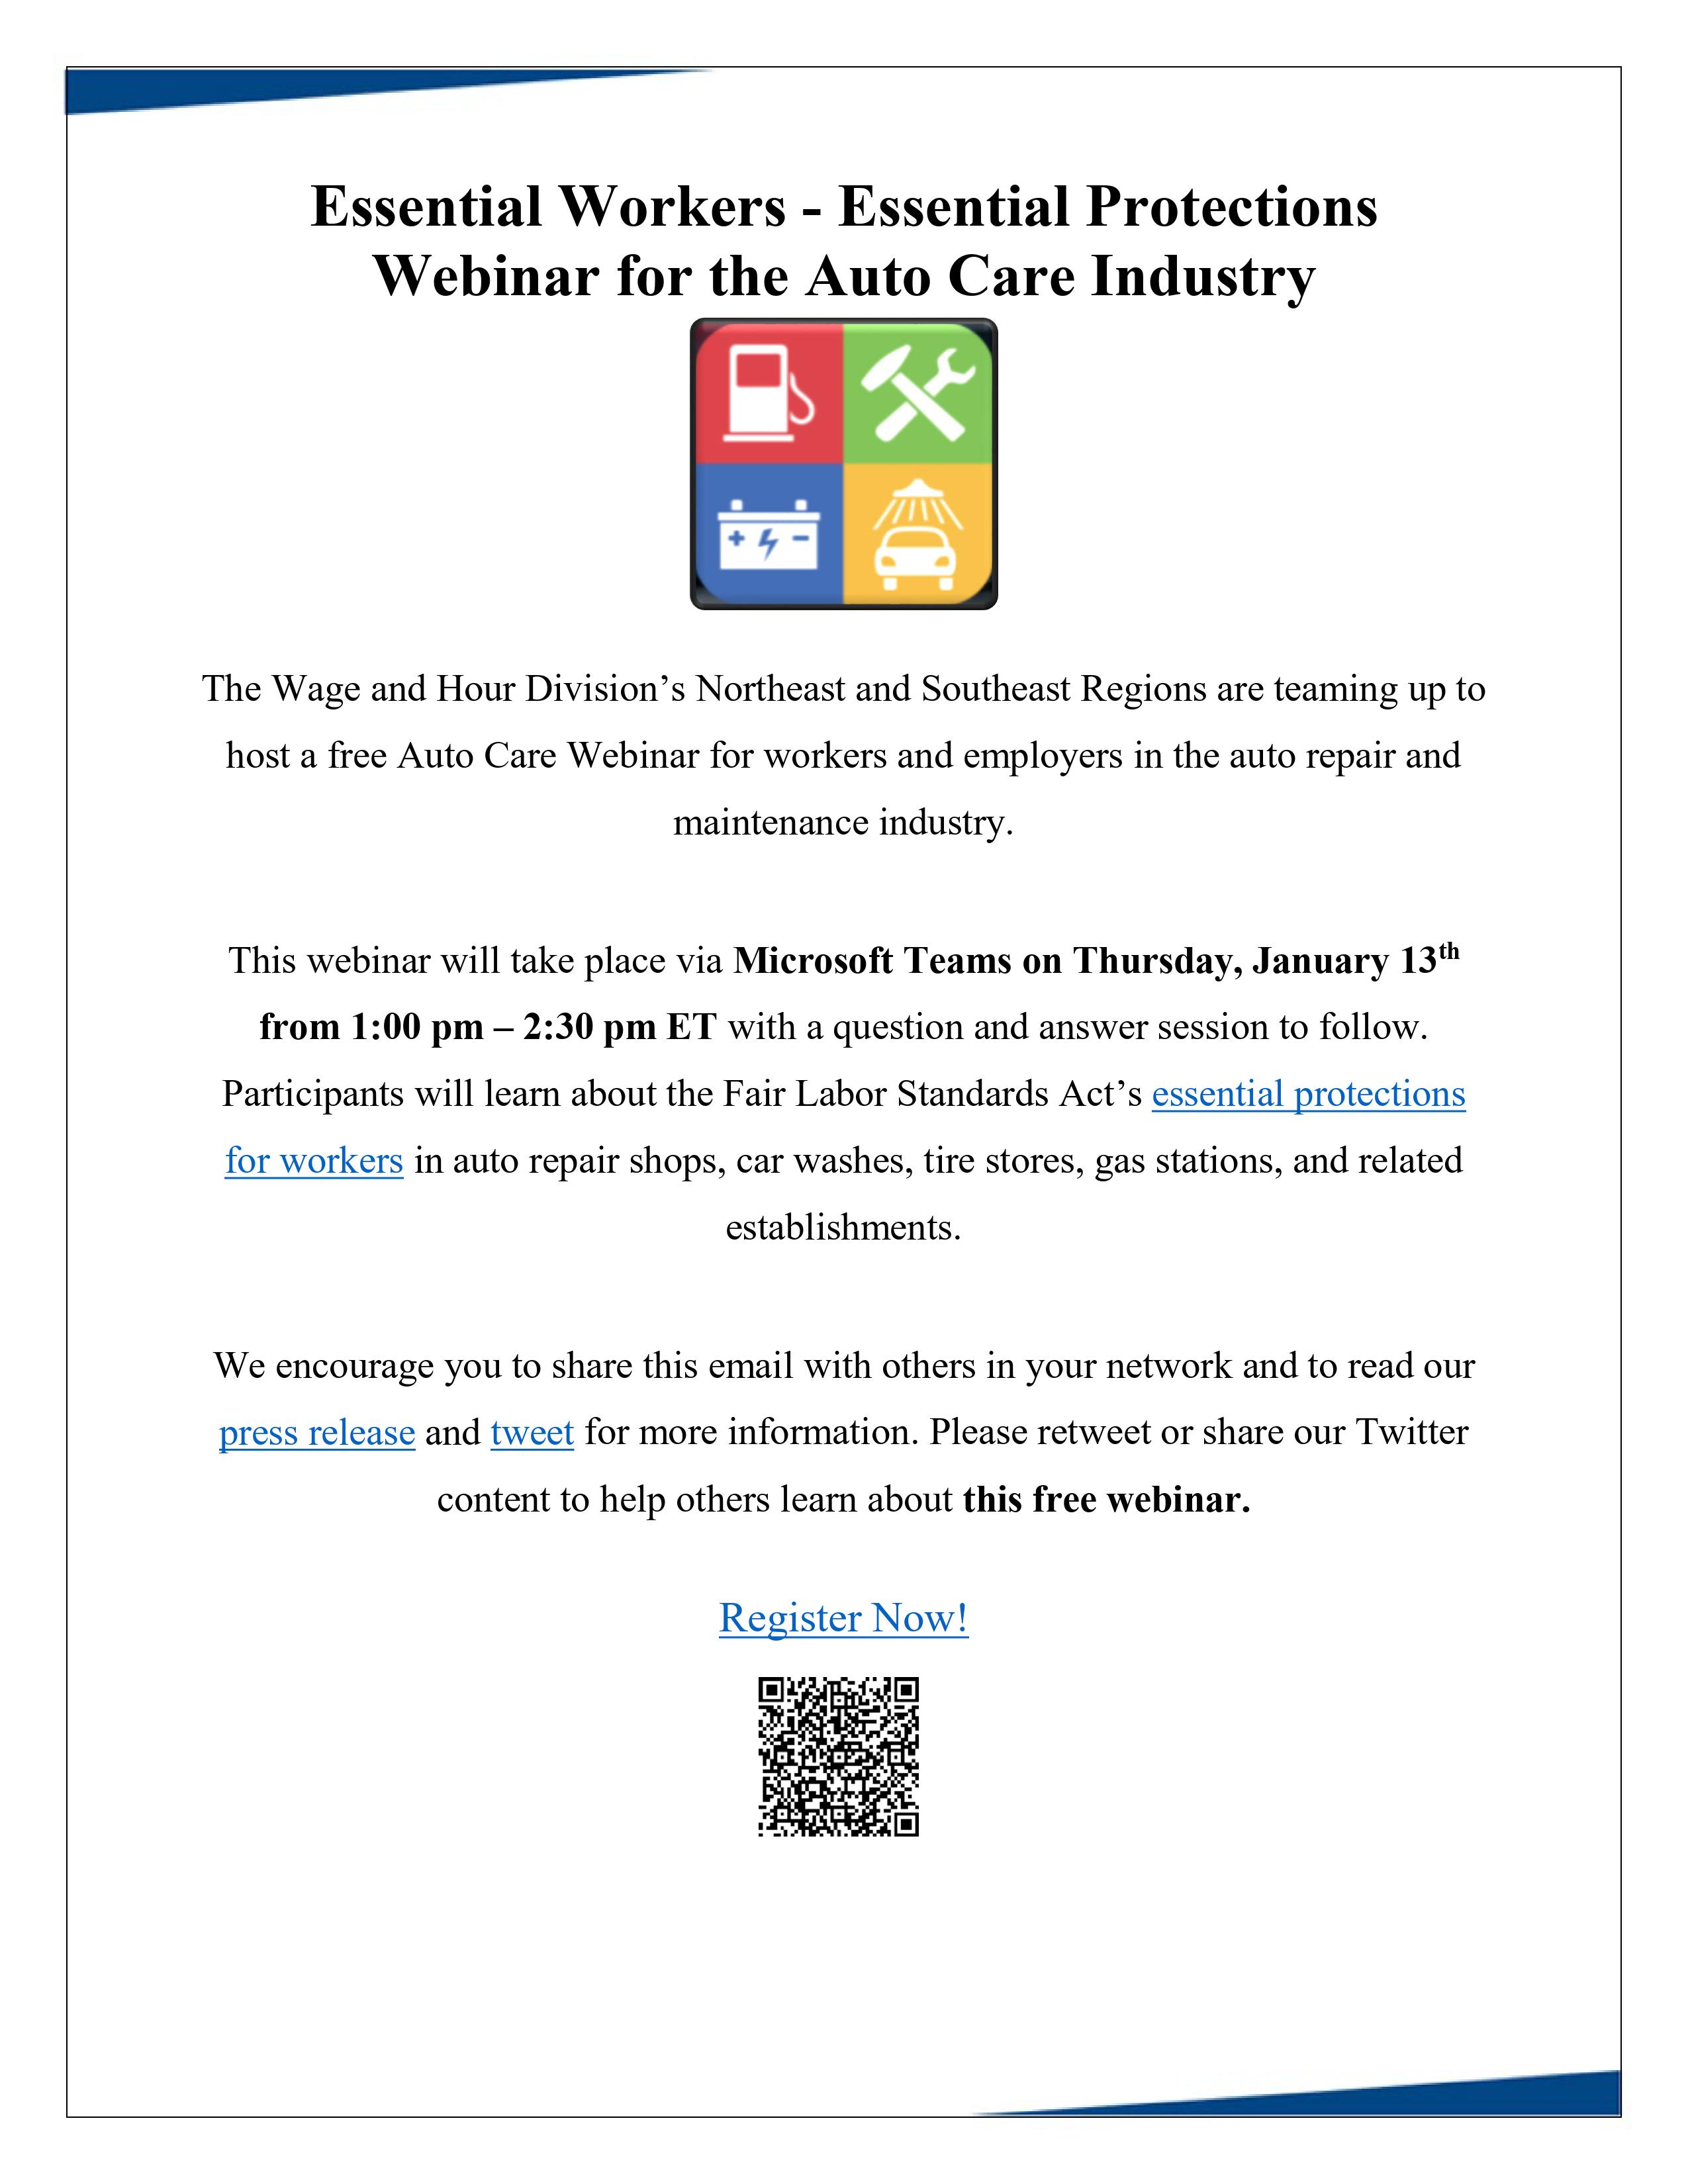 Essential Workers - Essential Protections Webinar for the Auto Care Industry